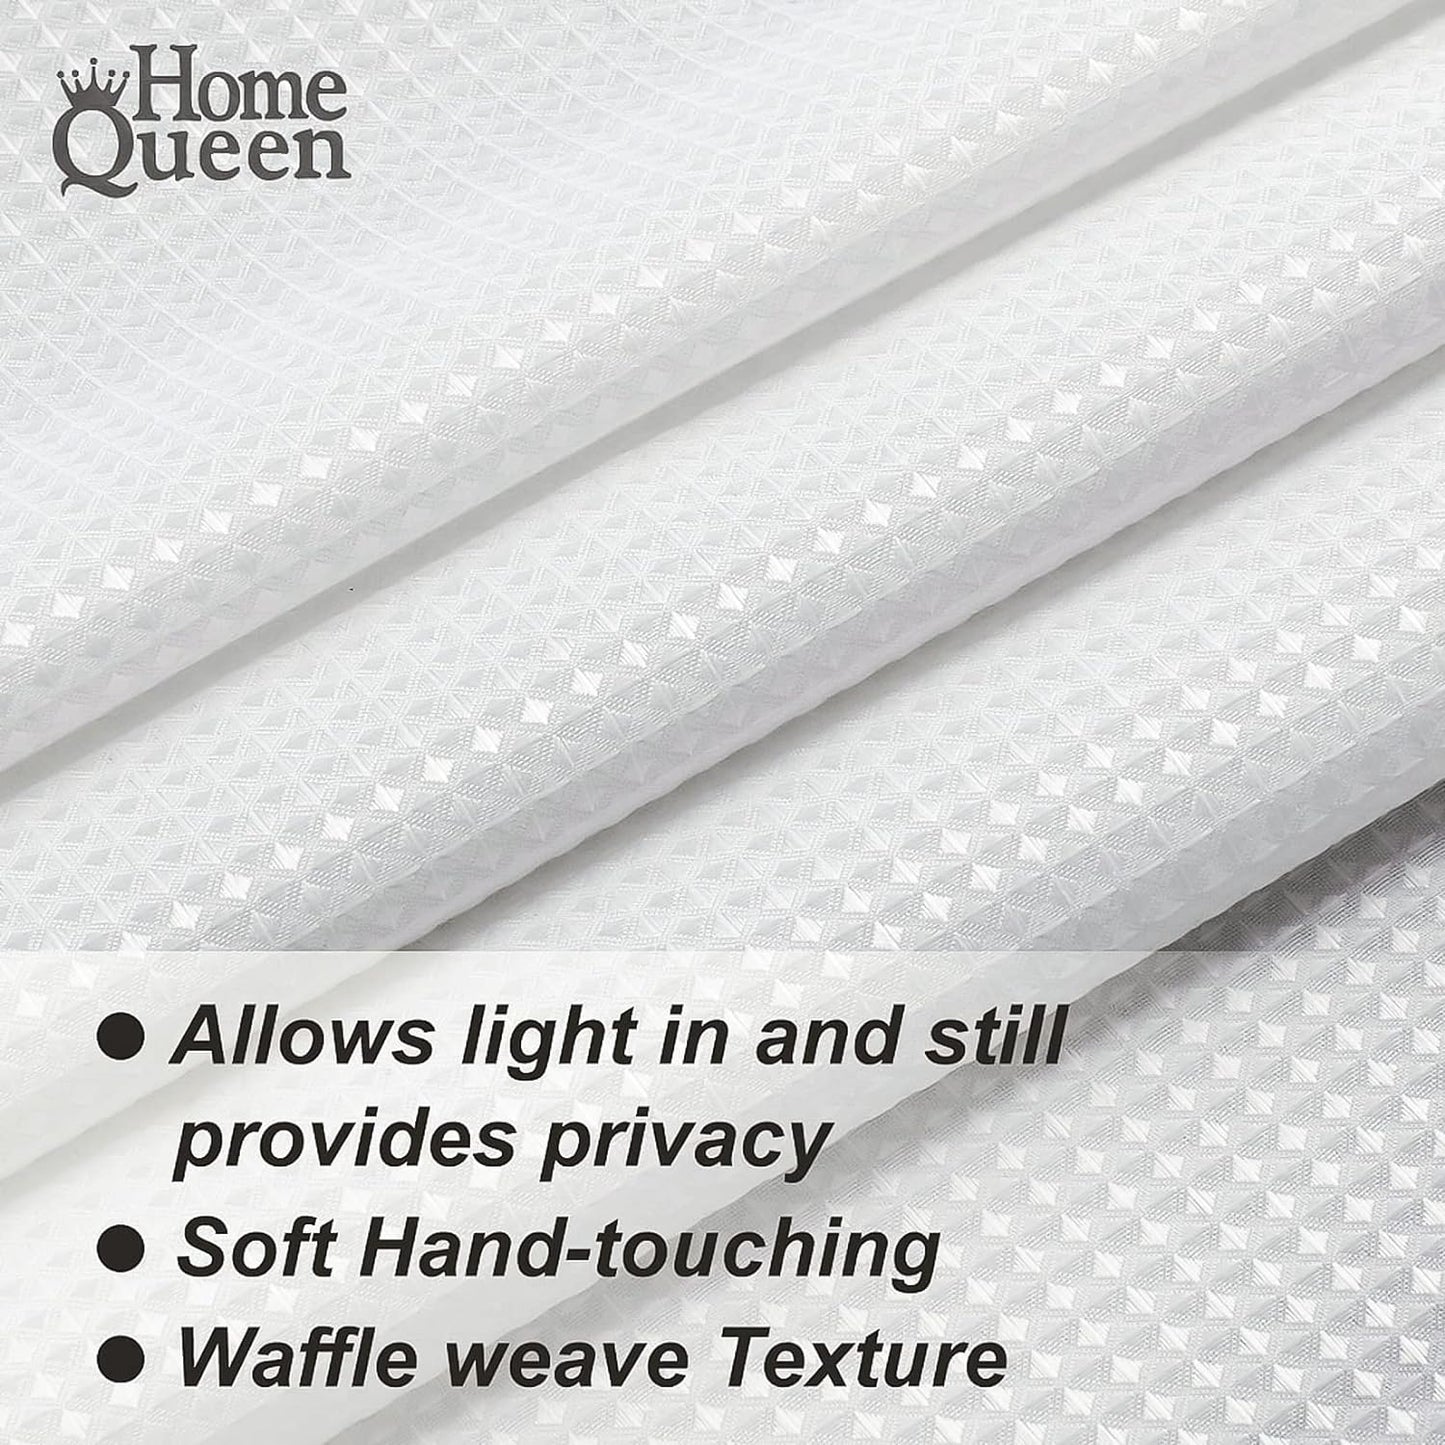 Home Queen White Waffle Bathroom Window Curtains, Water Repellent Rod Pocket Kitchen Drapes for Small Window, 2 Panels, 36 W X 45 L Inch Each  Better Design   